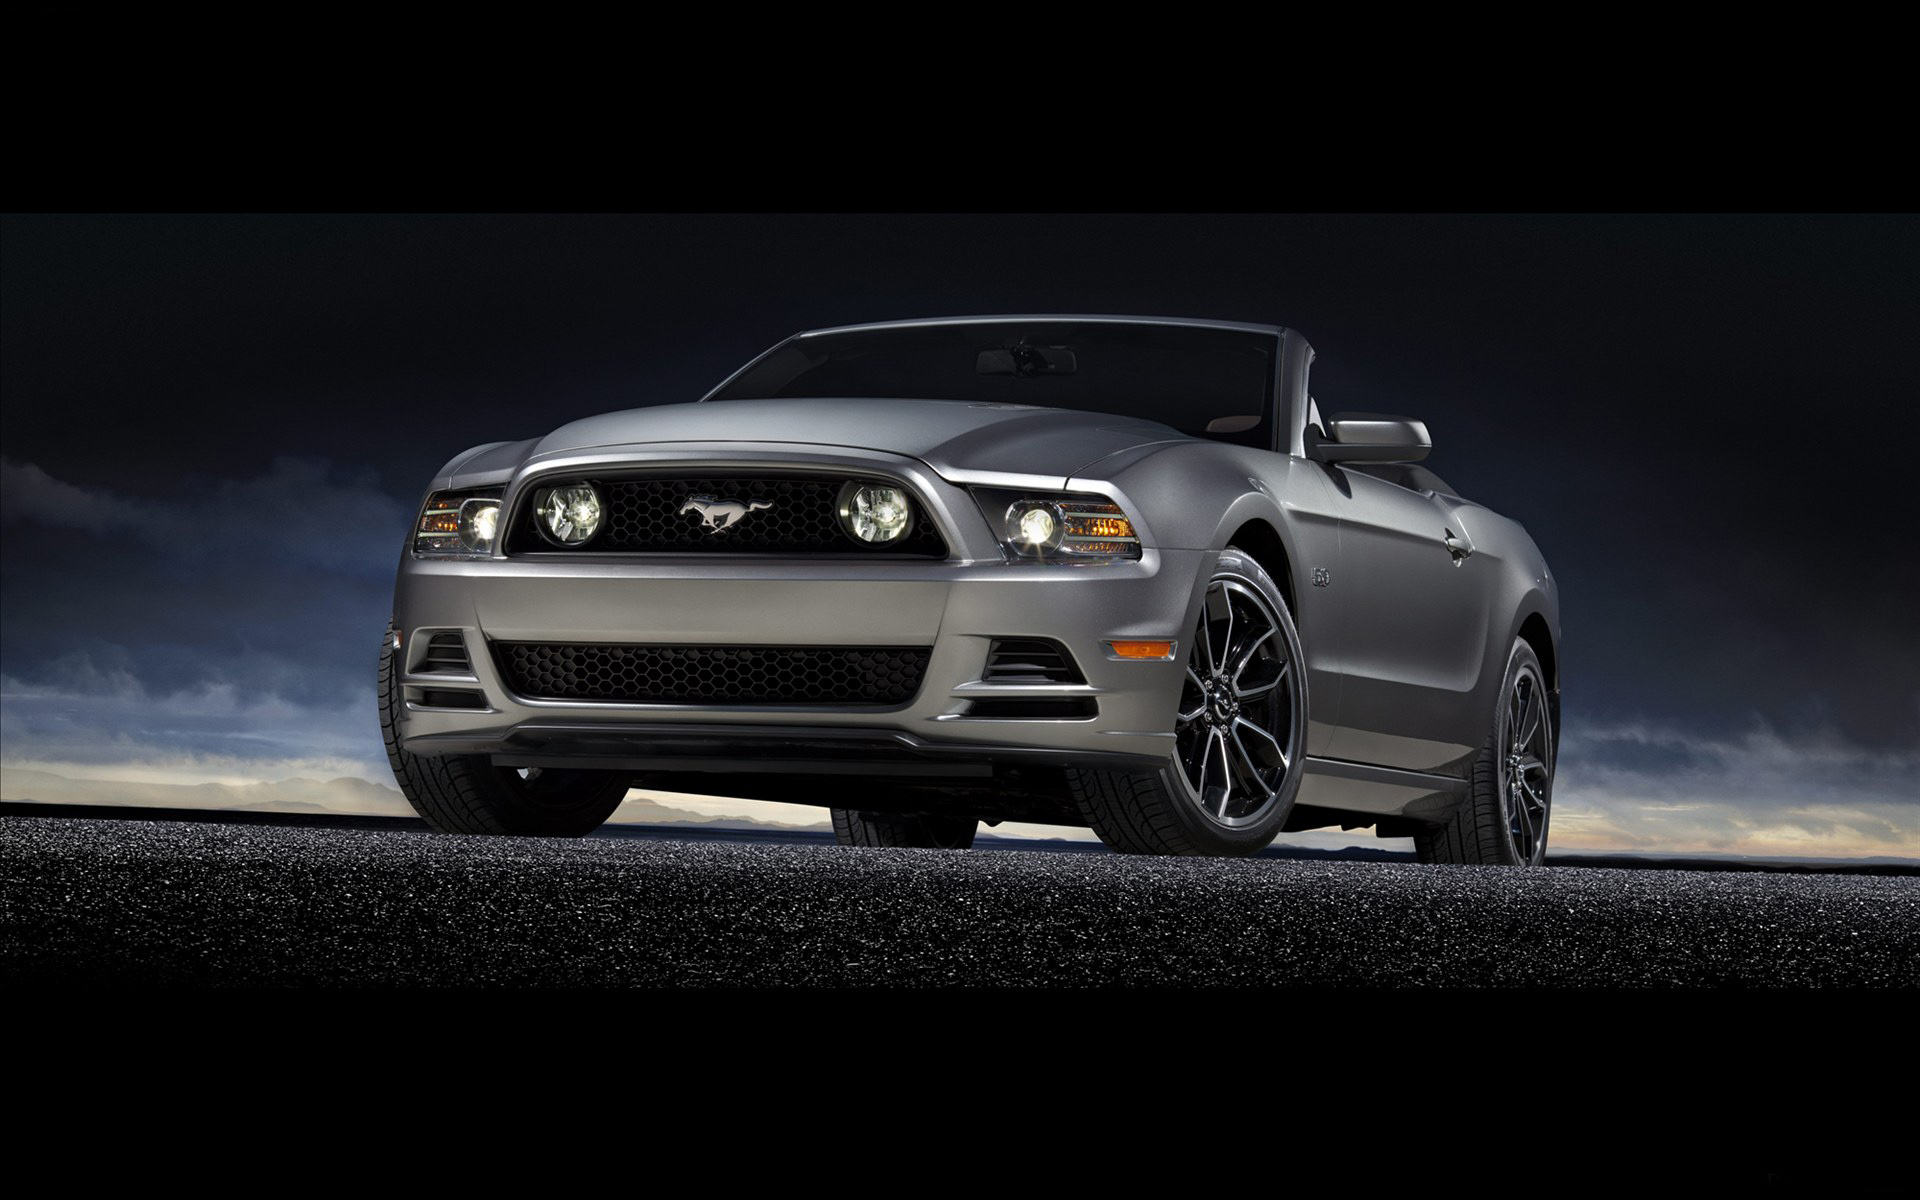 Ford Mustang GT 2013 Wallpaper | HD Car Wallpapers | ID #2530